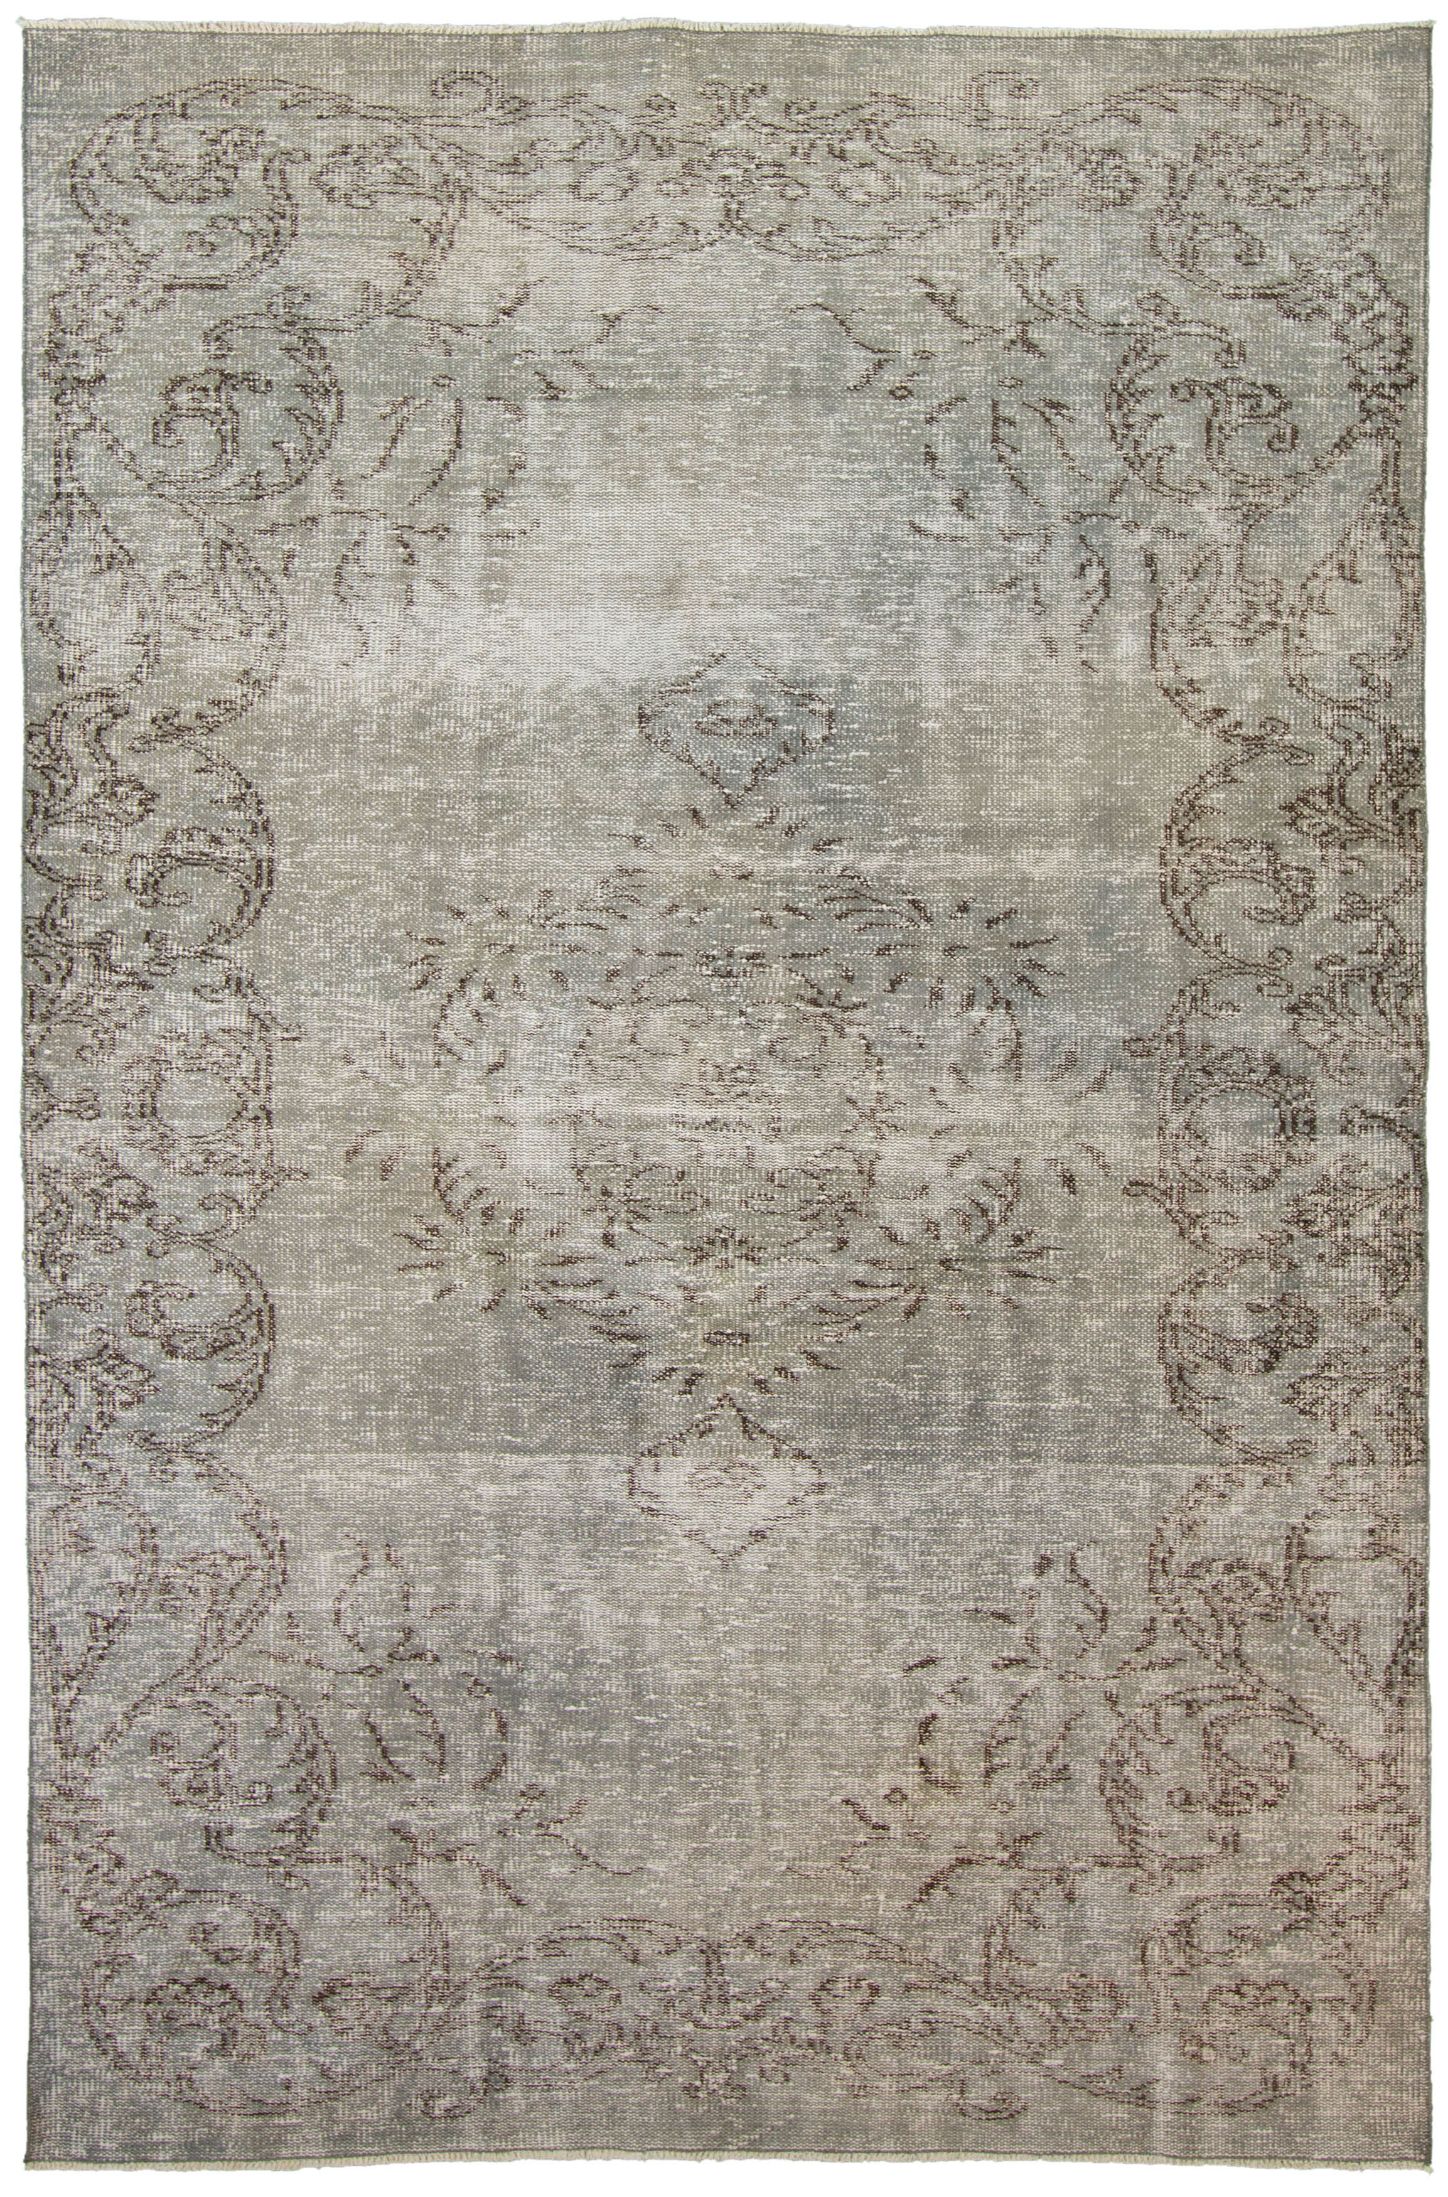 Hand-knotted Color Transition Dark Grey,  Wool Rug 5'6" x 8'6" Size: 5'6" x 8'6"  